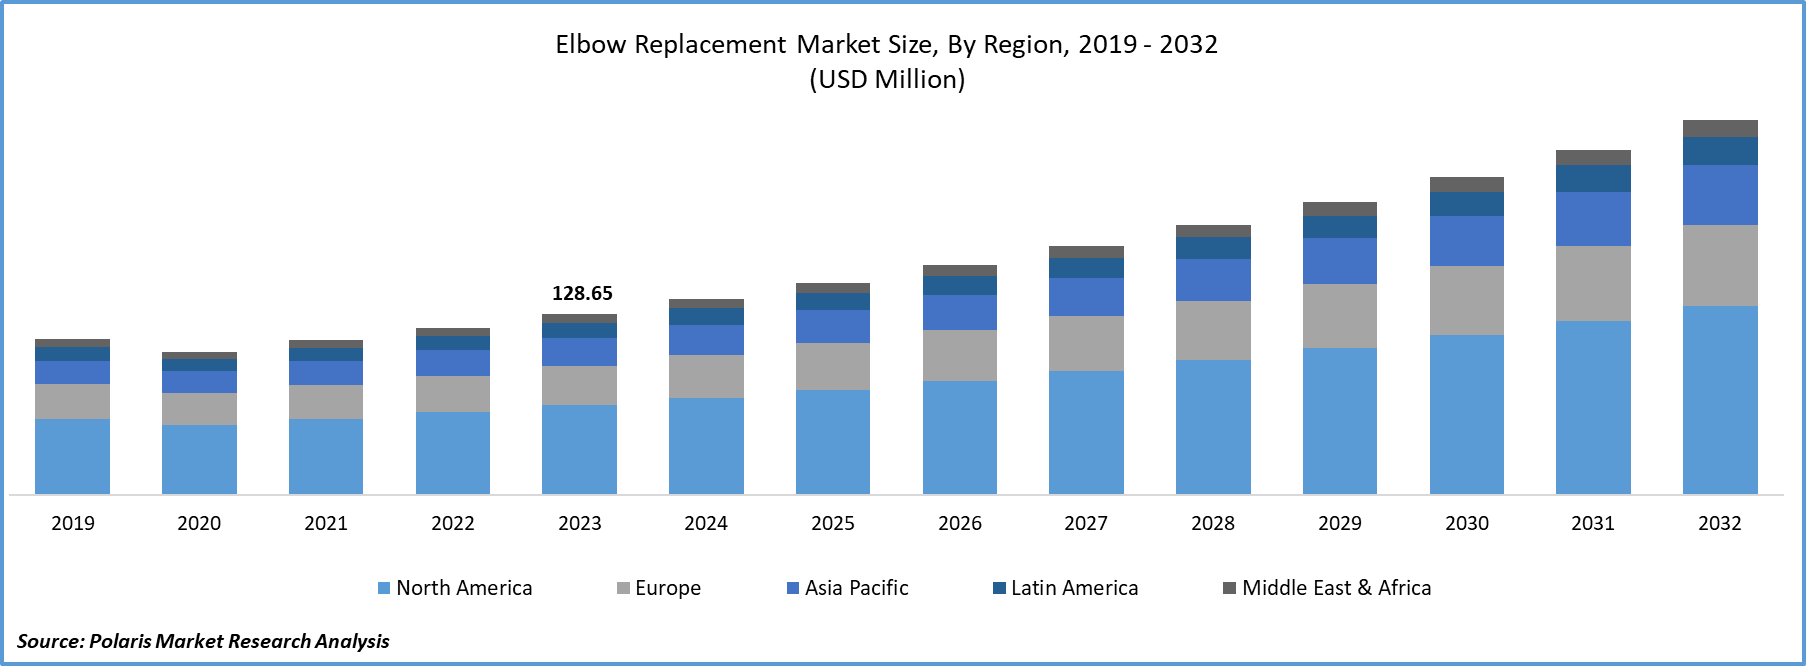 Elbow Replacement Market Size